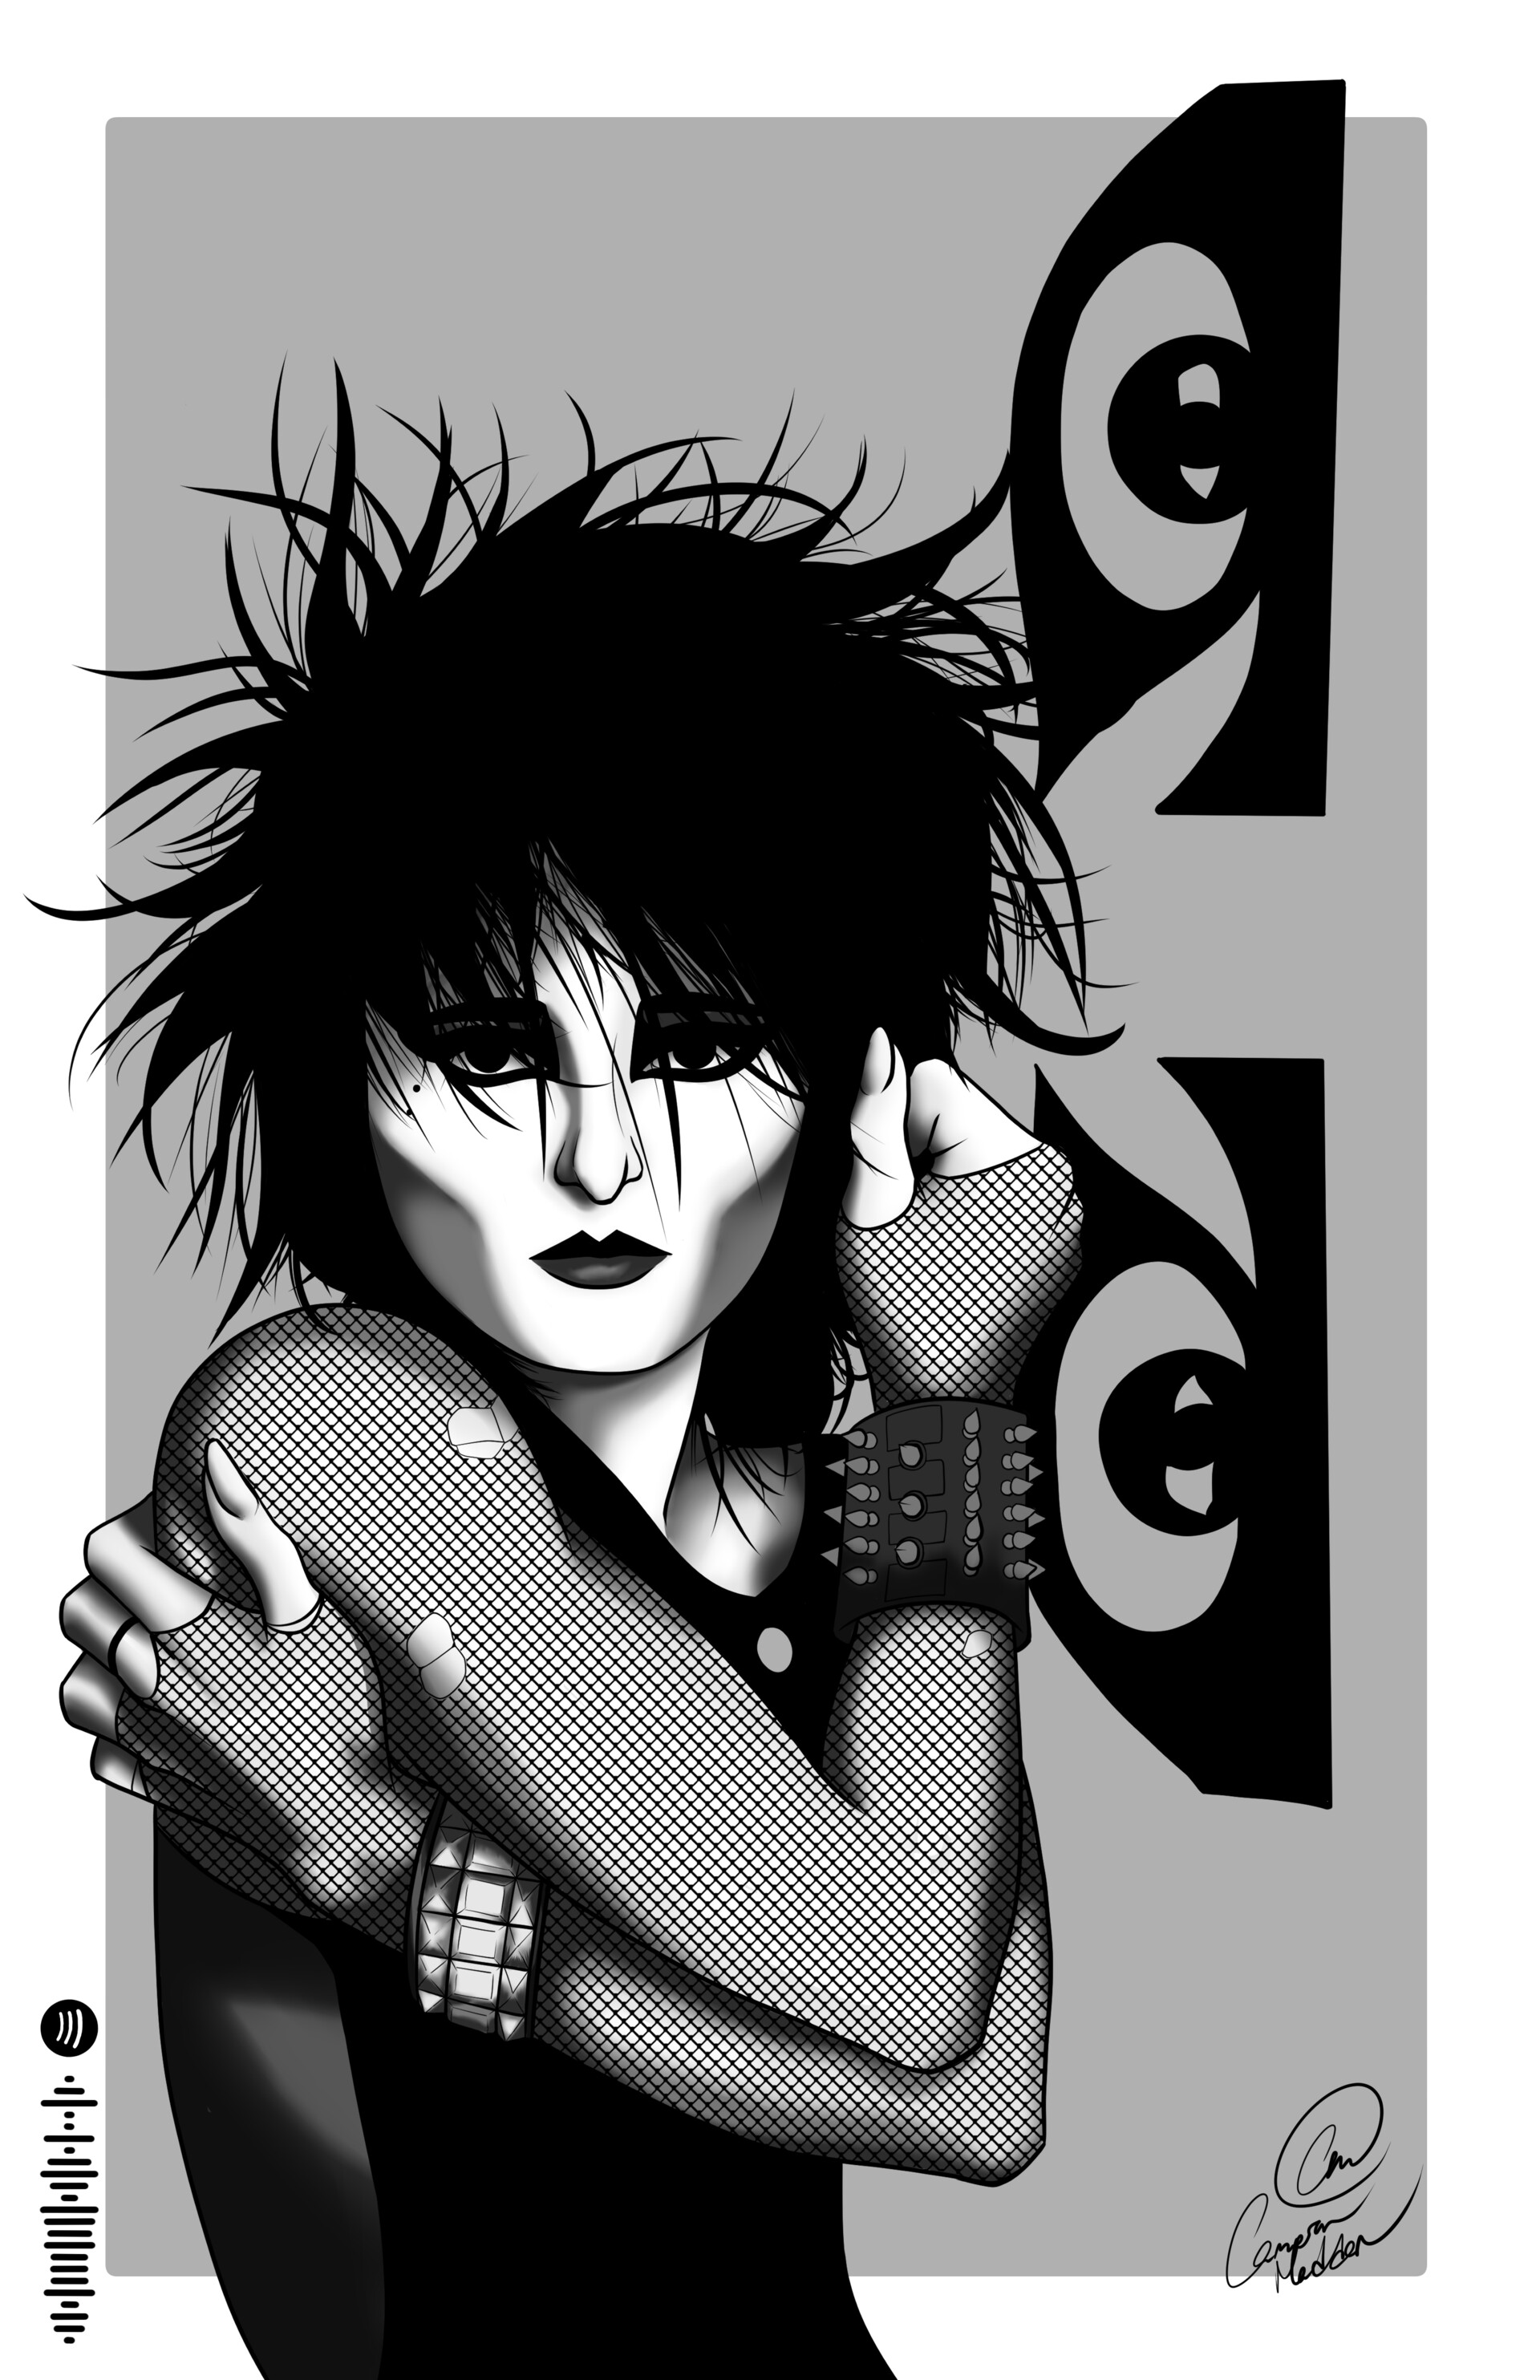 ArtStation - Siouxsie Sioux of Siouxsie and the Banshees